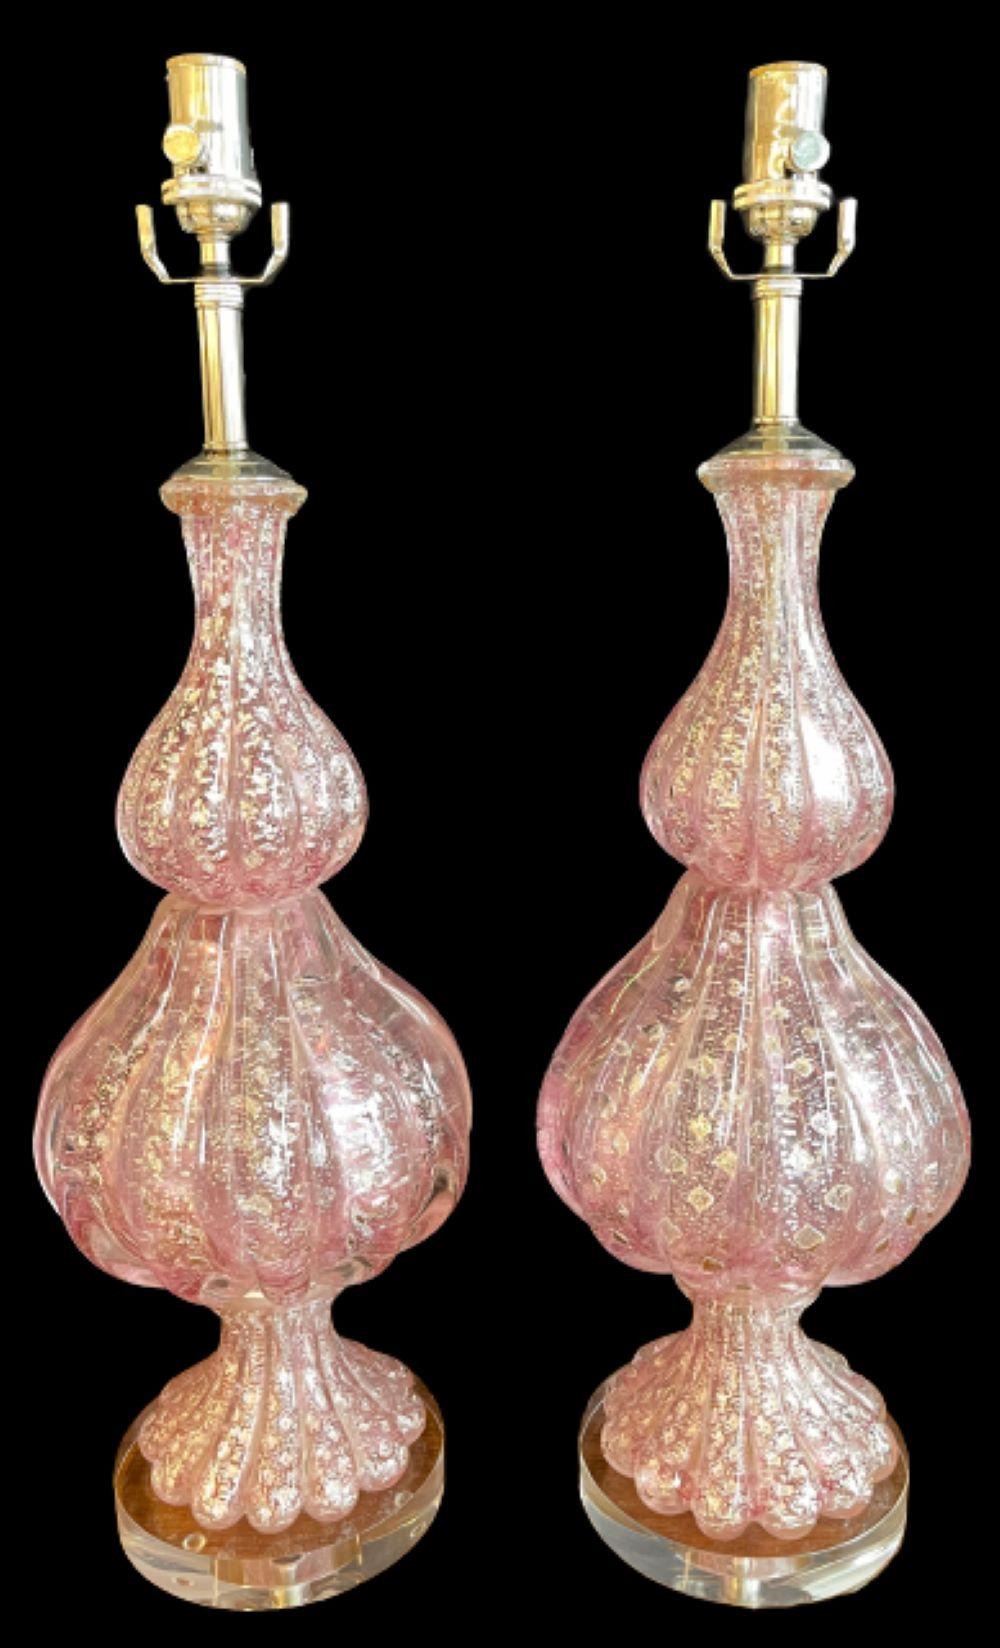 Italian Barovier & Toso Murano table lamps. A fine pair of bulbous pink and silver murano glass lamps on a lucite base.